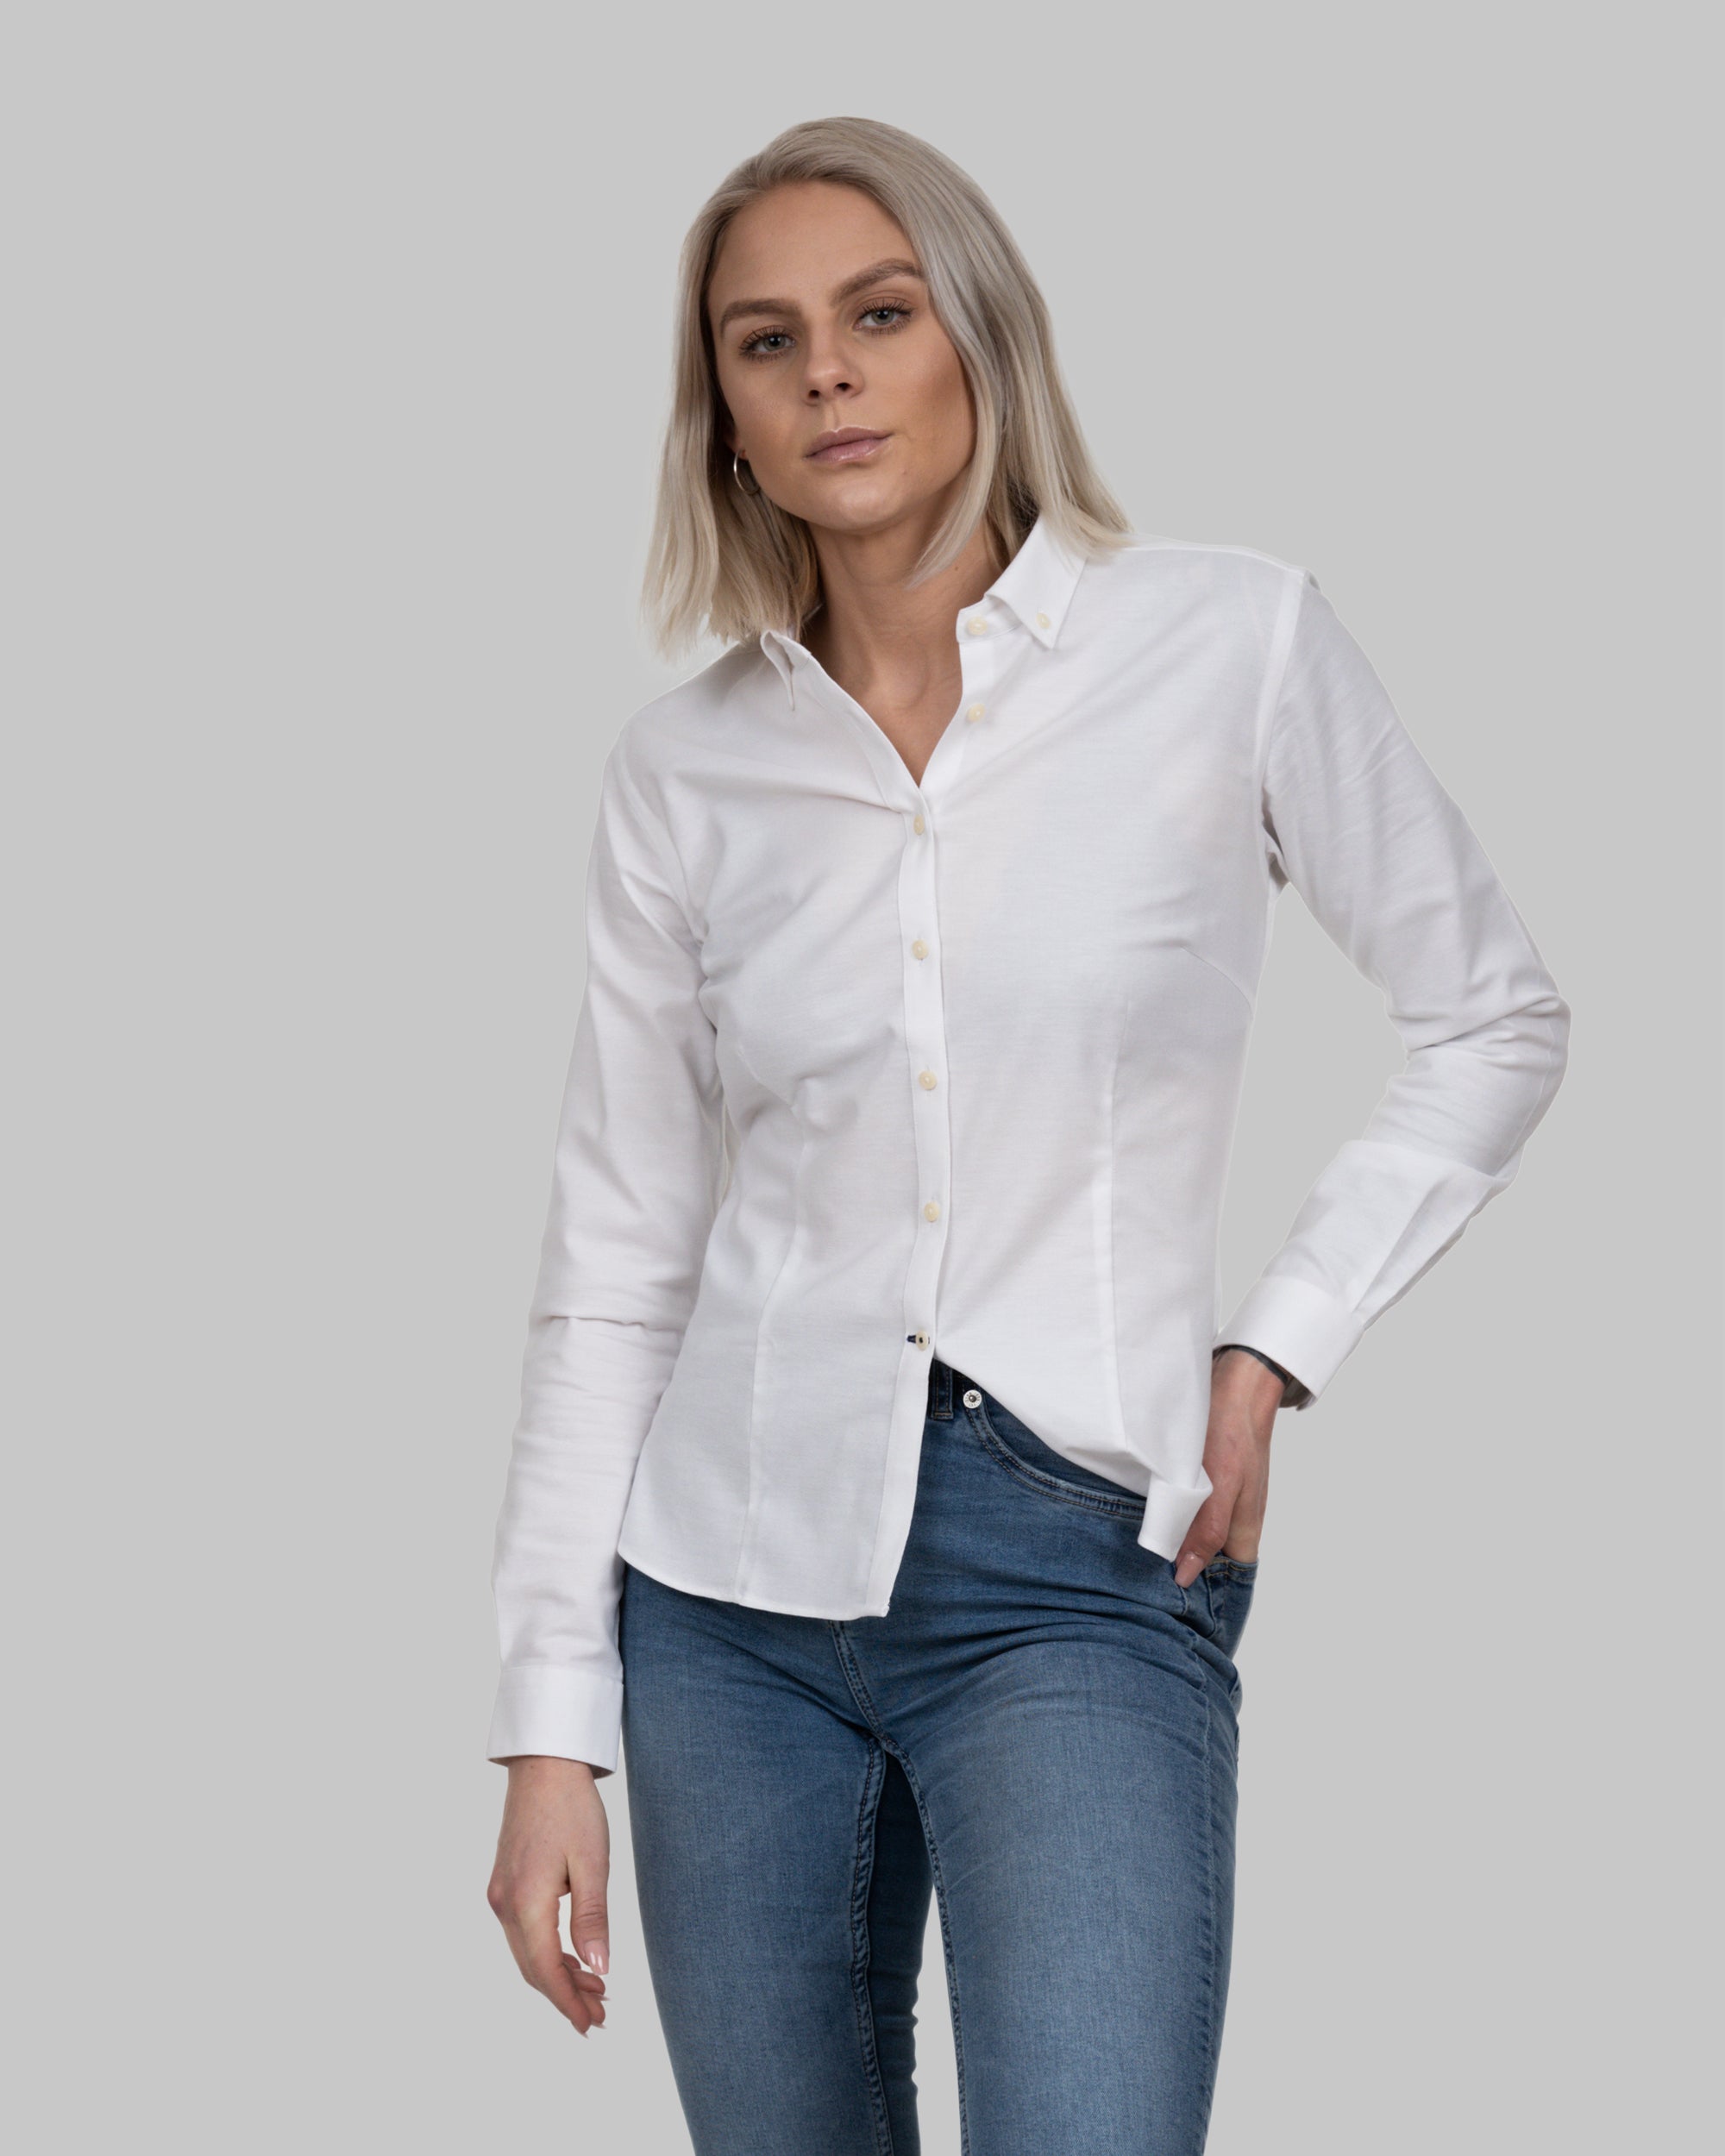 Yellow Bow 54 White Woman – J. Harvest & Frost: Corporate Shirtmaker